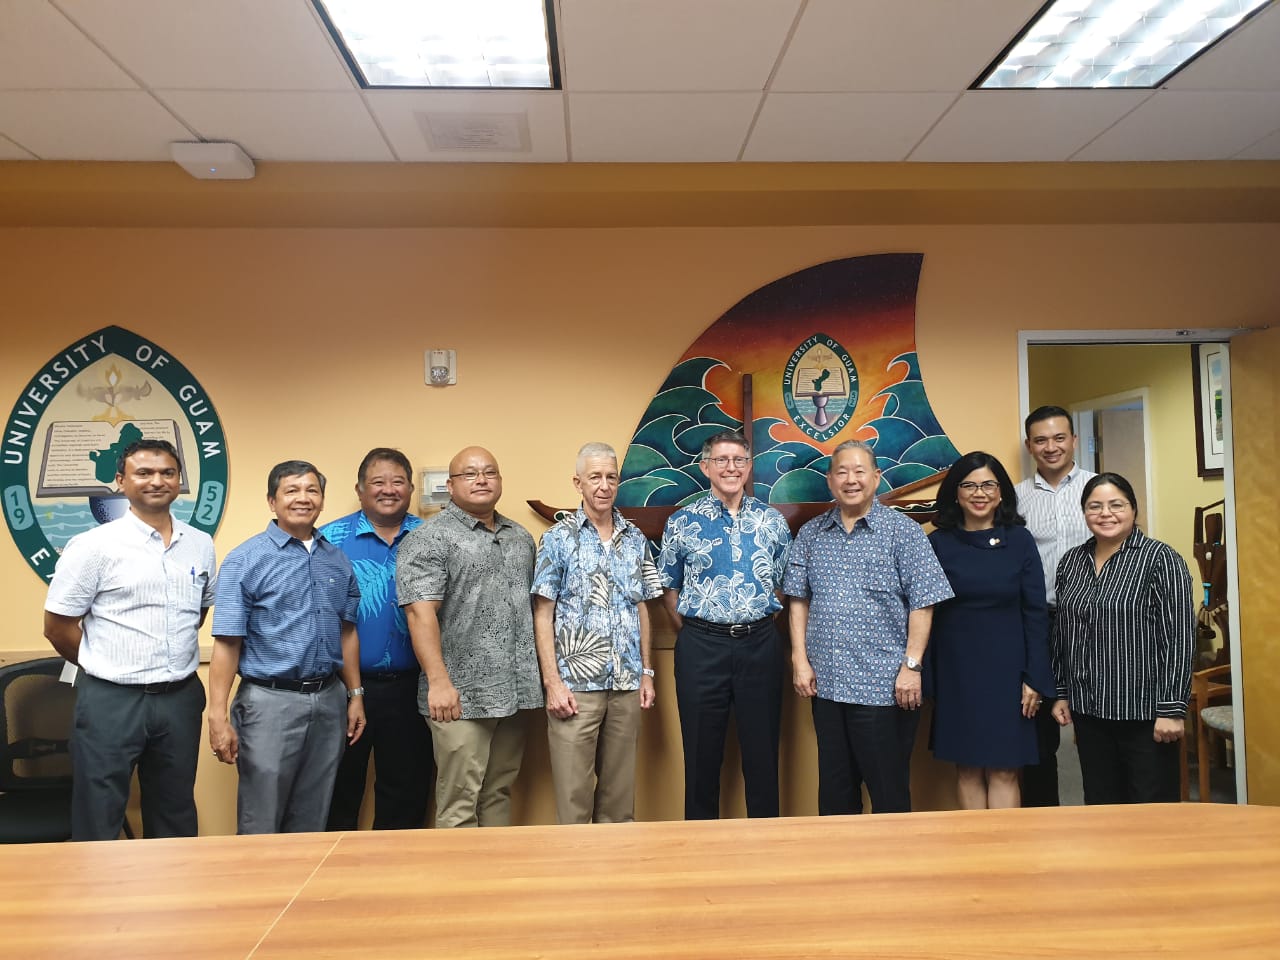 Group photo of Leadership from SSFM International and the University of Guam at a meeting in January.